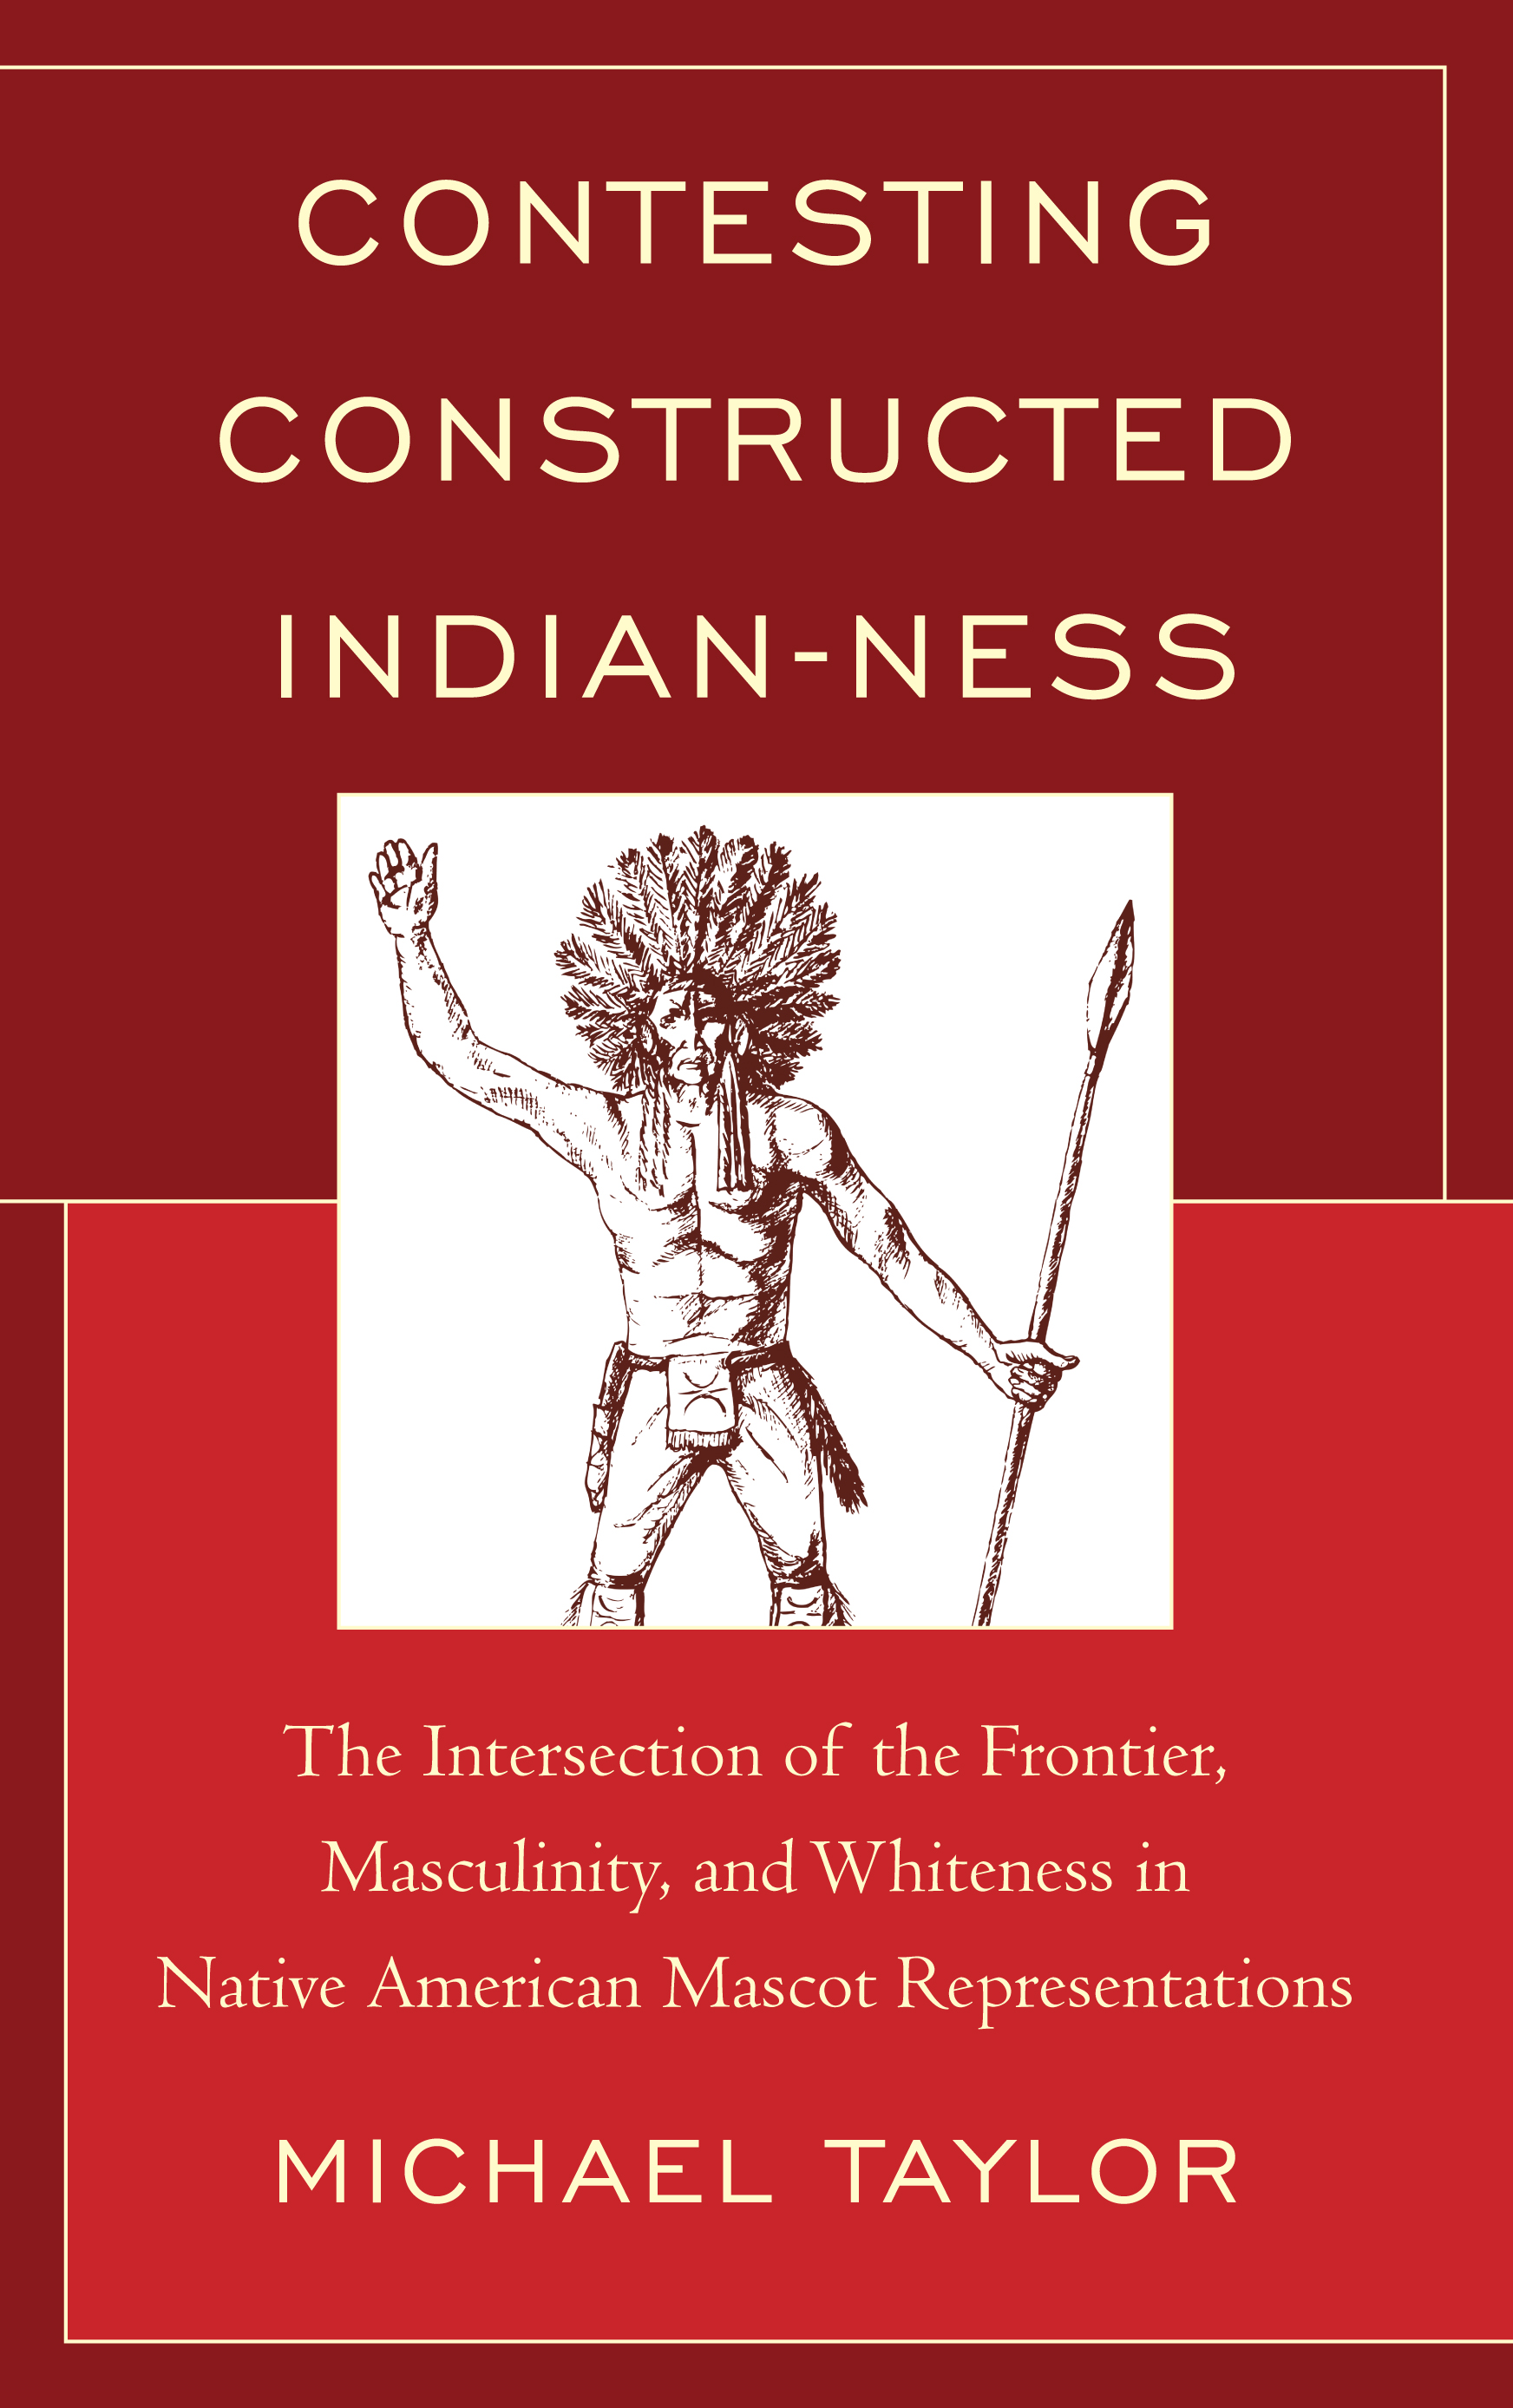 Contesting Constructed Indian-ness: The Intersection of the Frontier, Masculinity, and Whiteness in Native American Mascot Representations